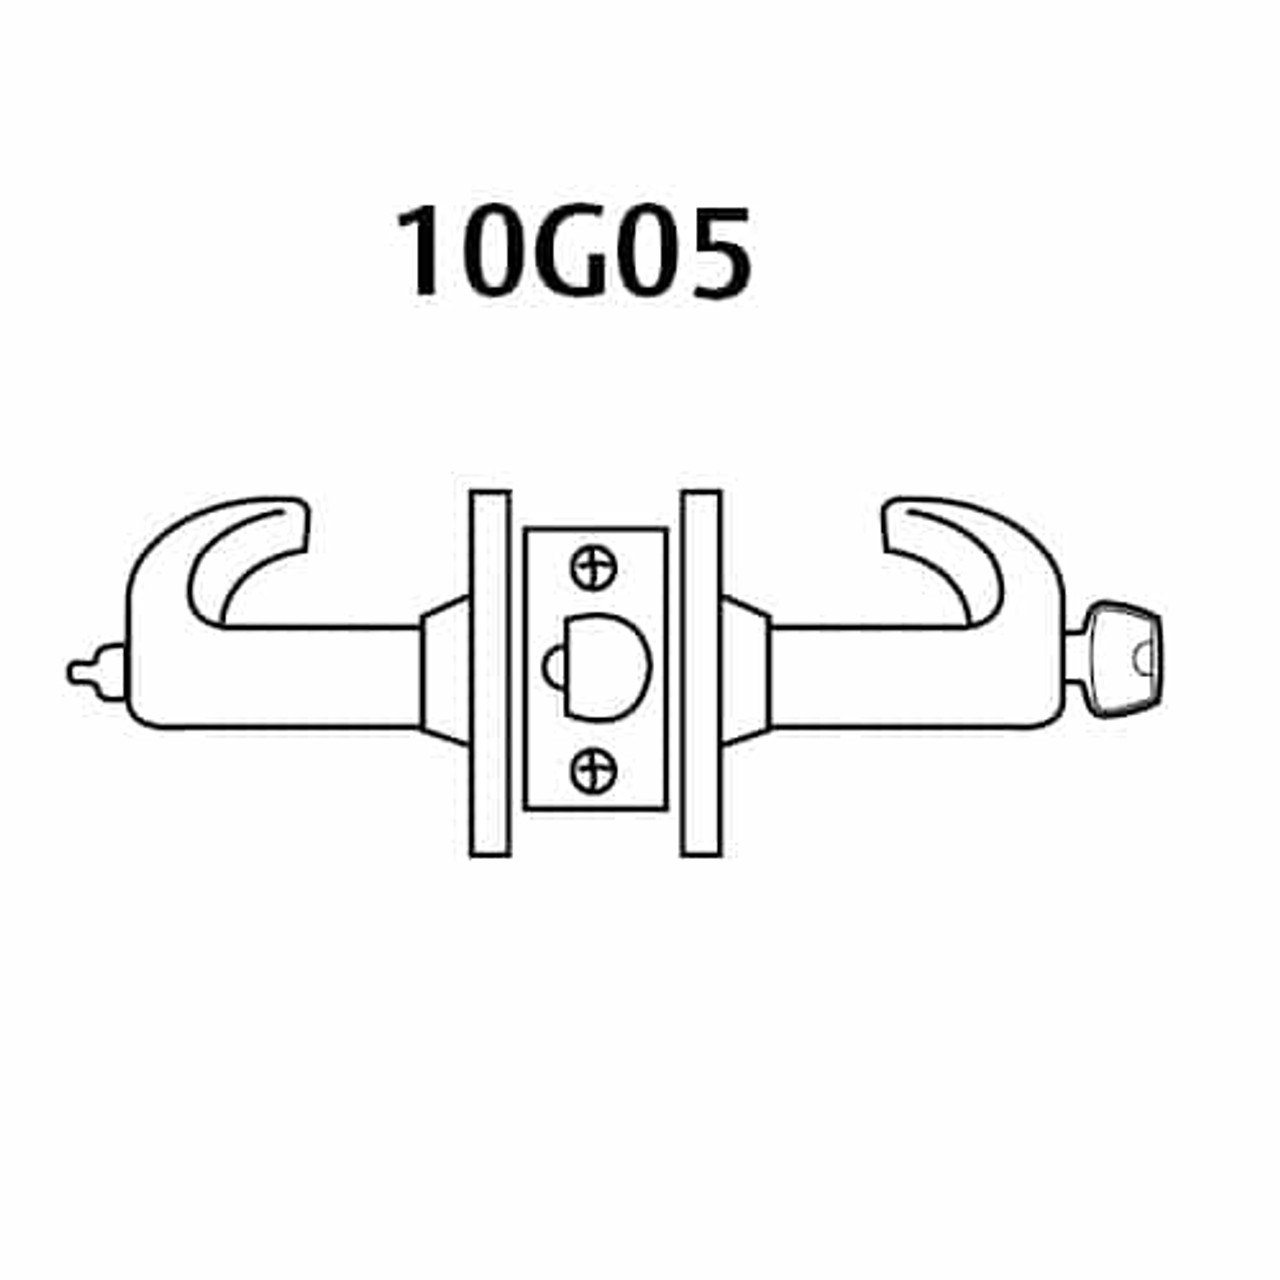 28-10G05-GB-26 Sargent 10 Line Cylindrical Entry/Office Locks with B Lever Design and G Rose in Bright Chrome